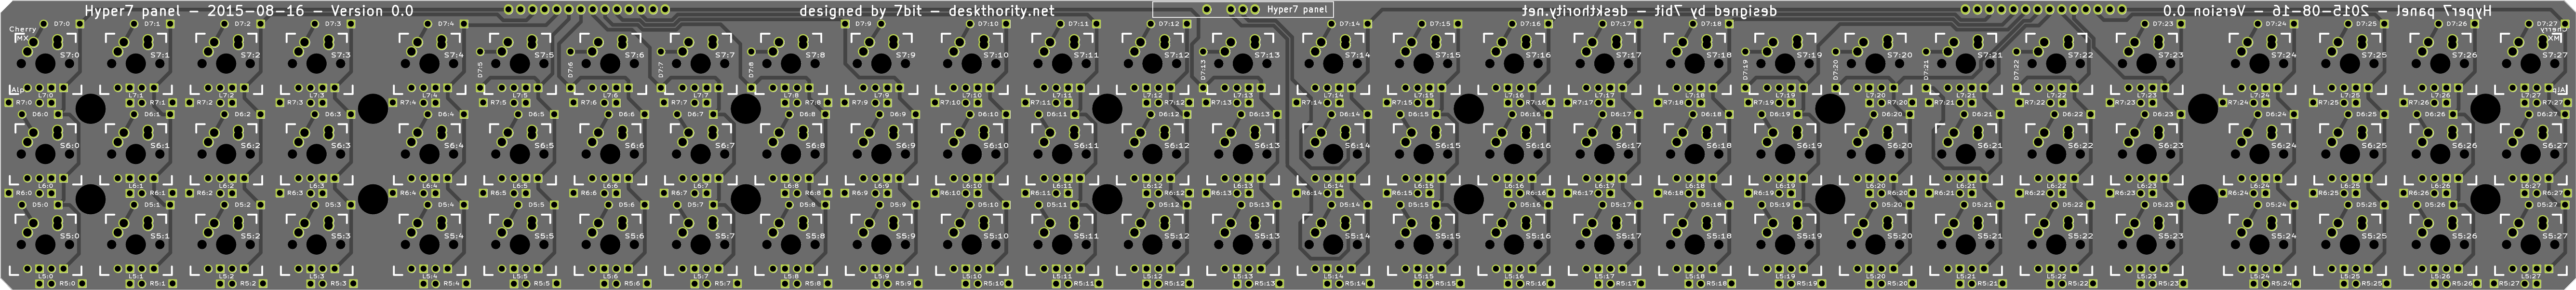 Hyper7_PCB2_front.png